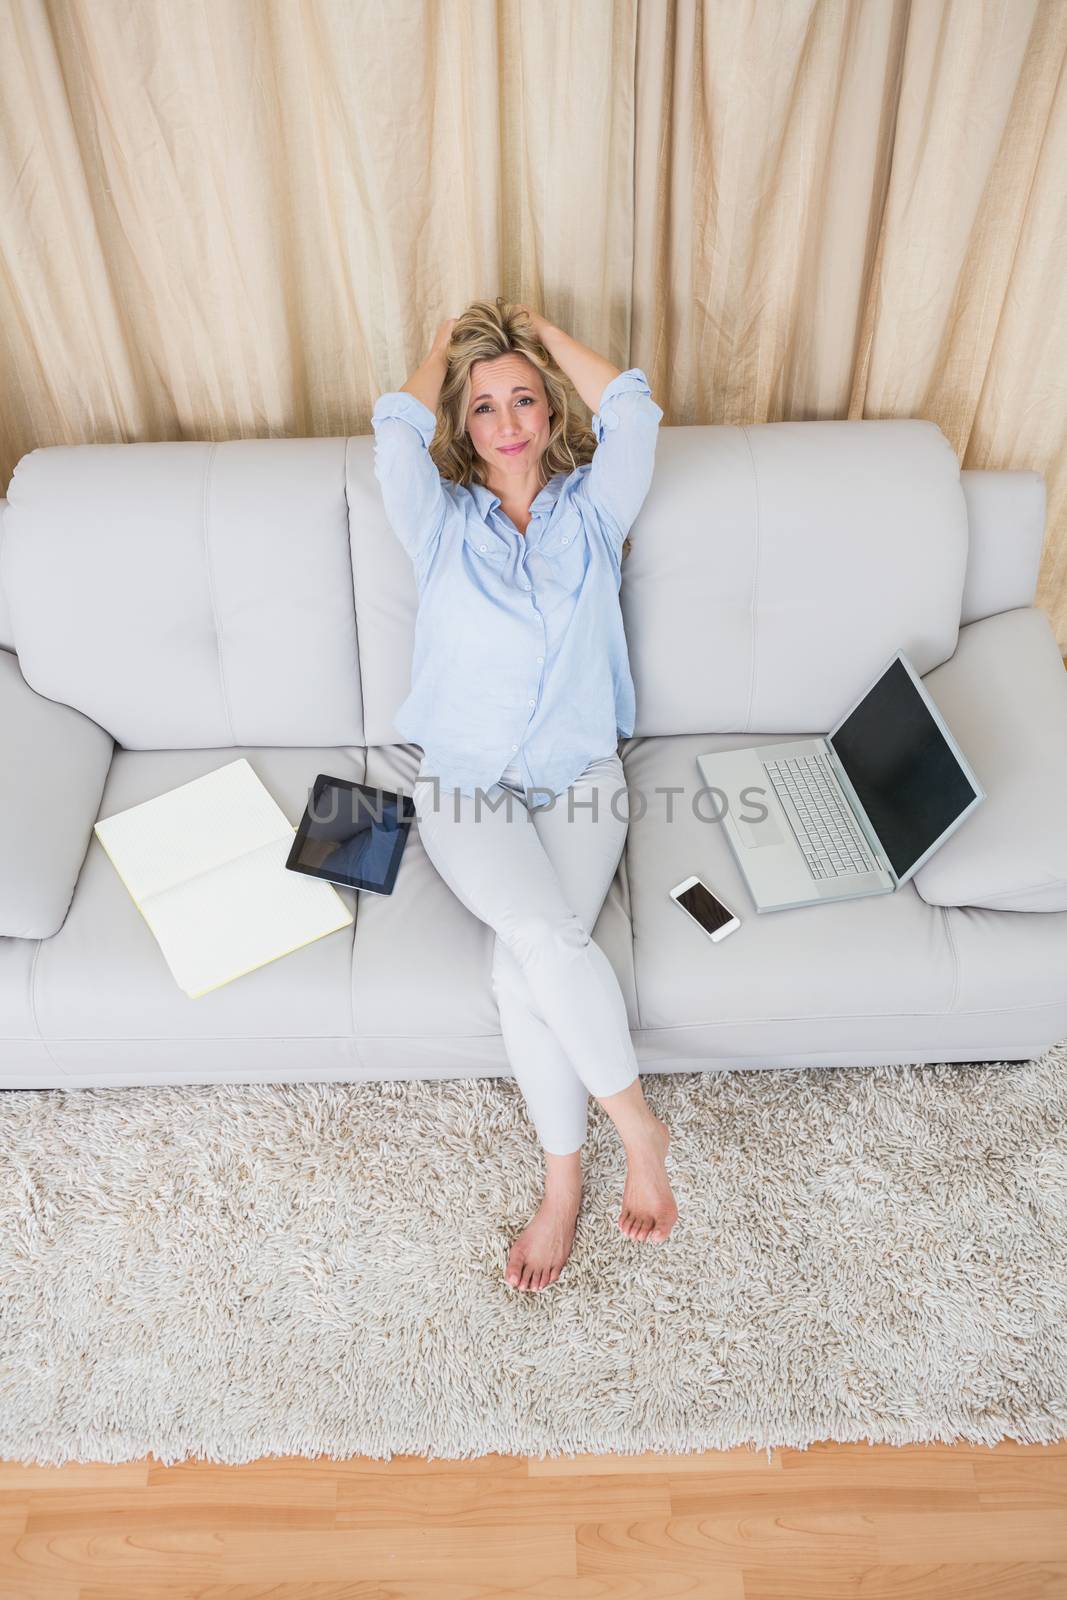 Pretty blonde sitting on couch near wirelesses technology at home in the living room